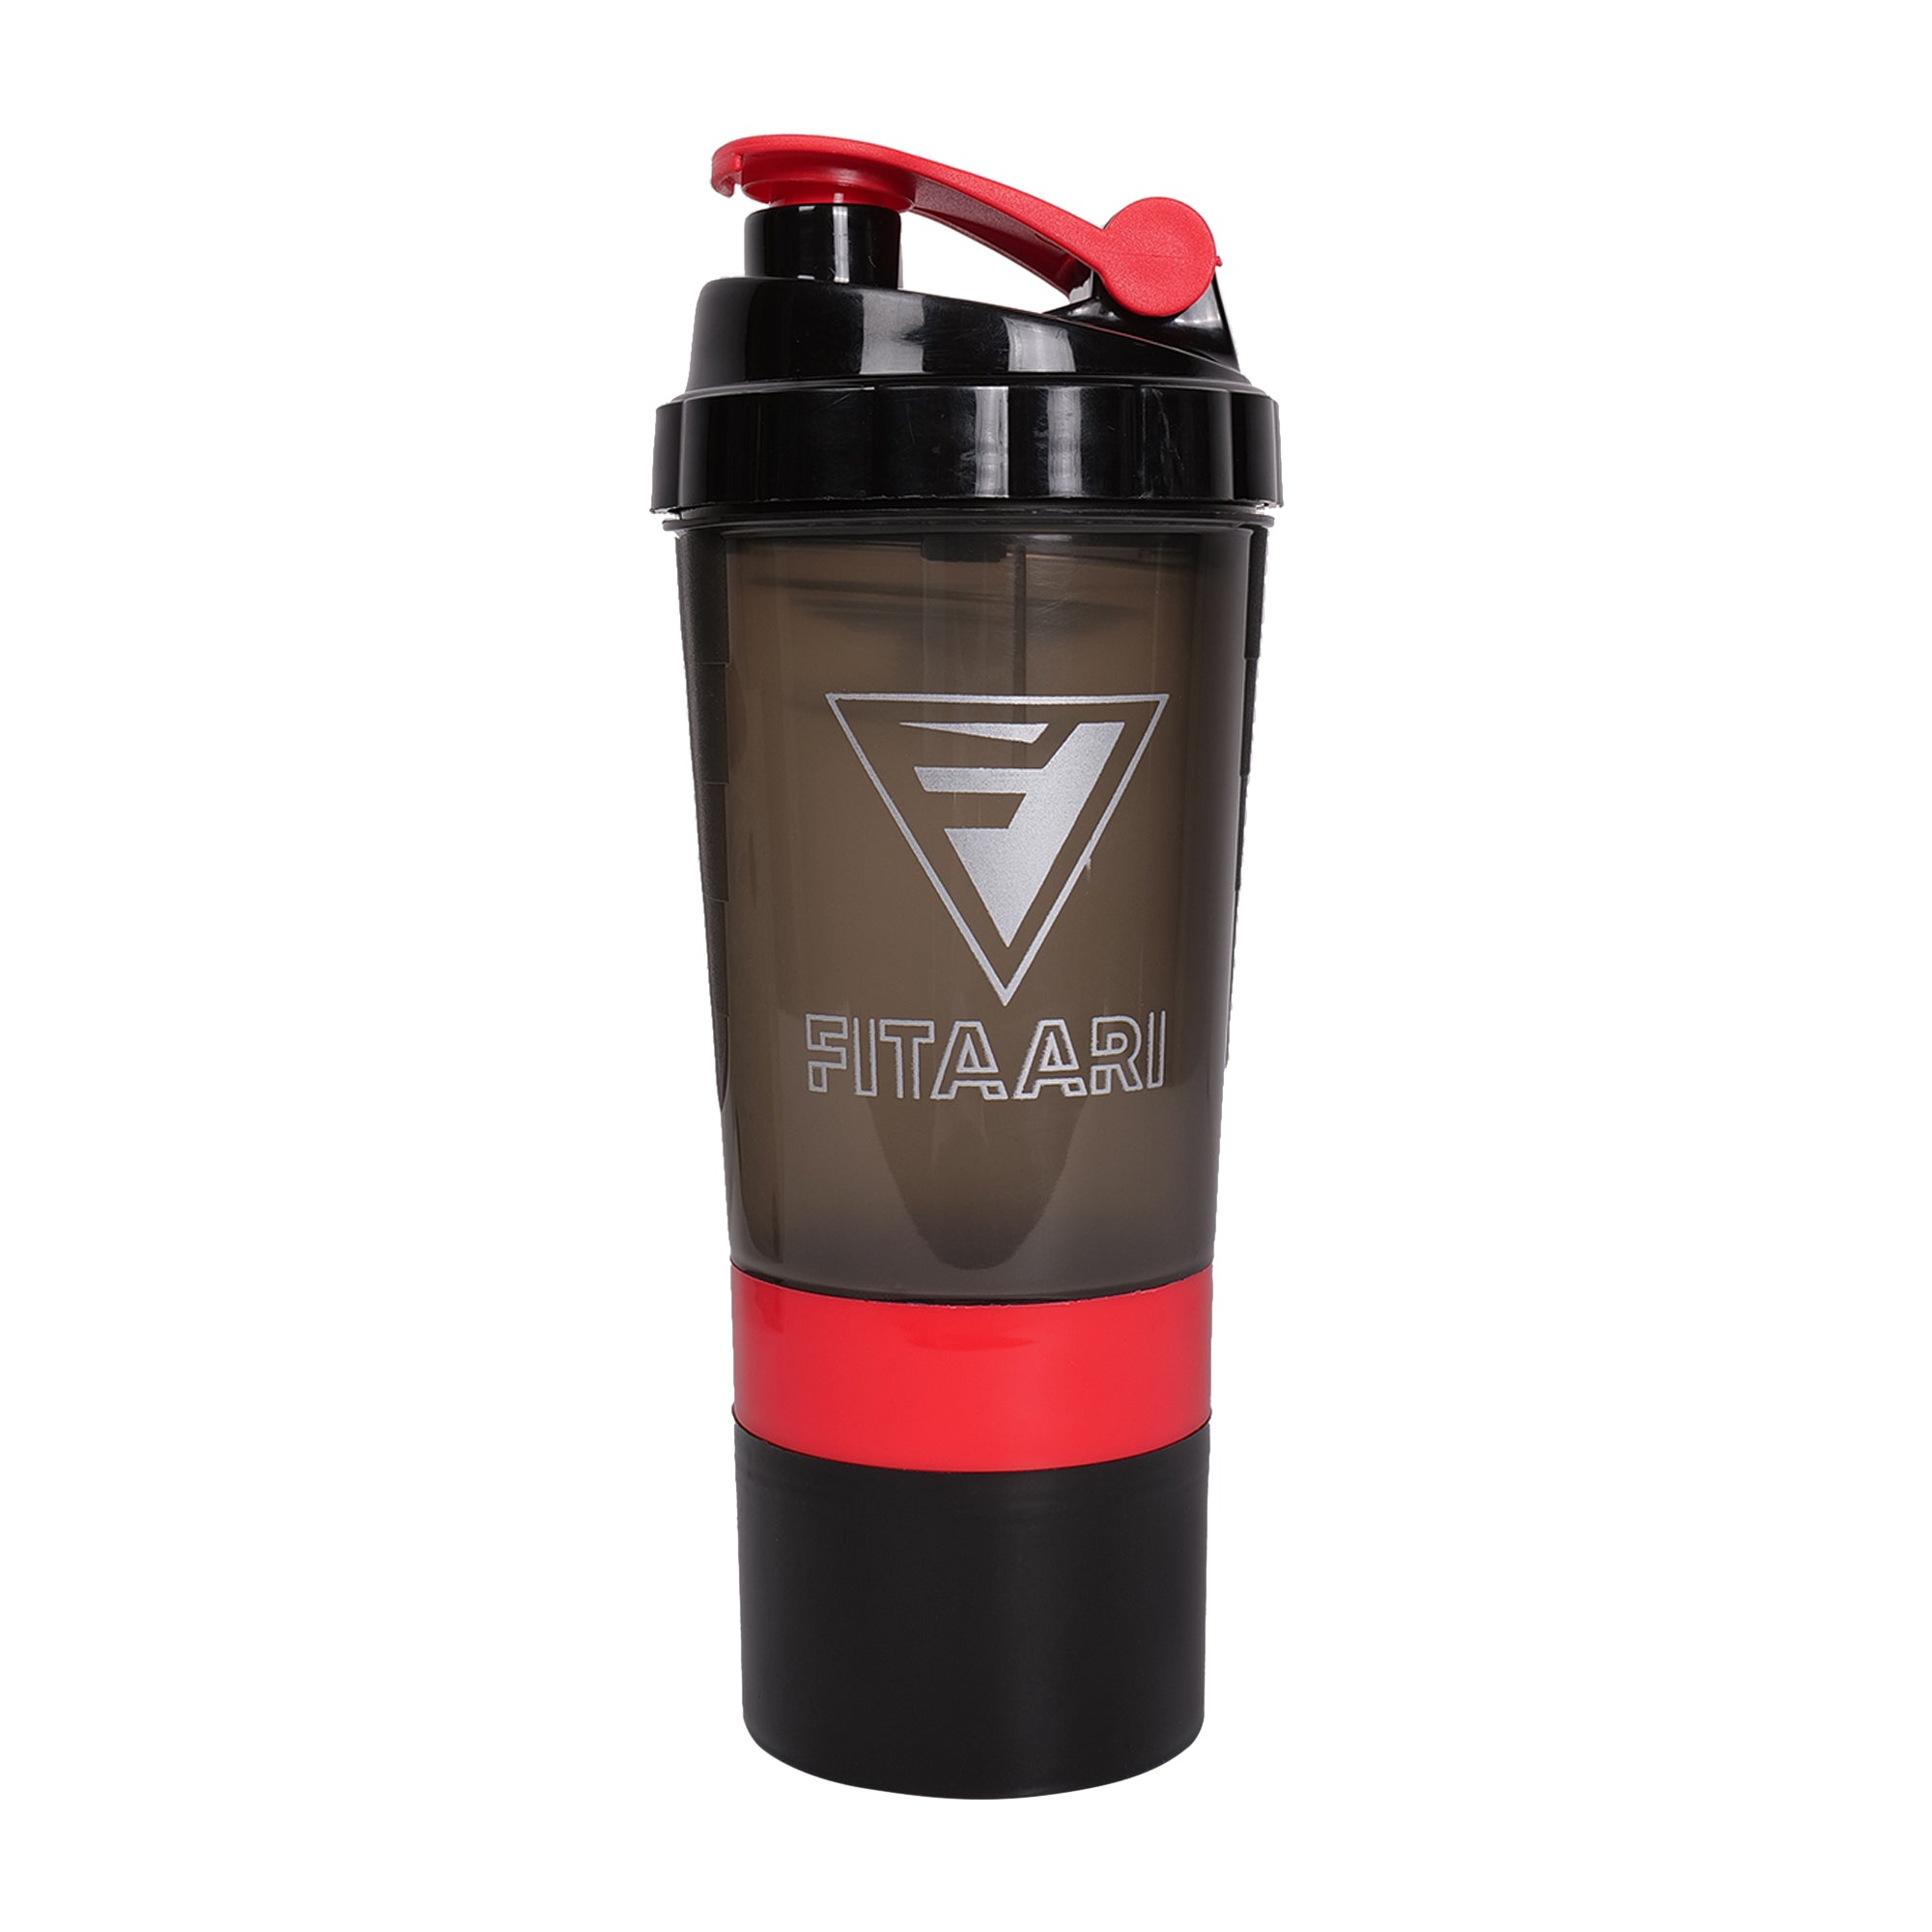 Fitaari Premium Shaker Bottle WIth Whey And Pill Container